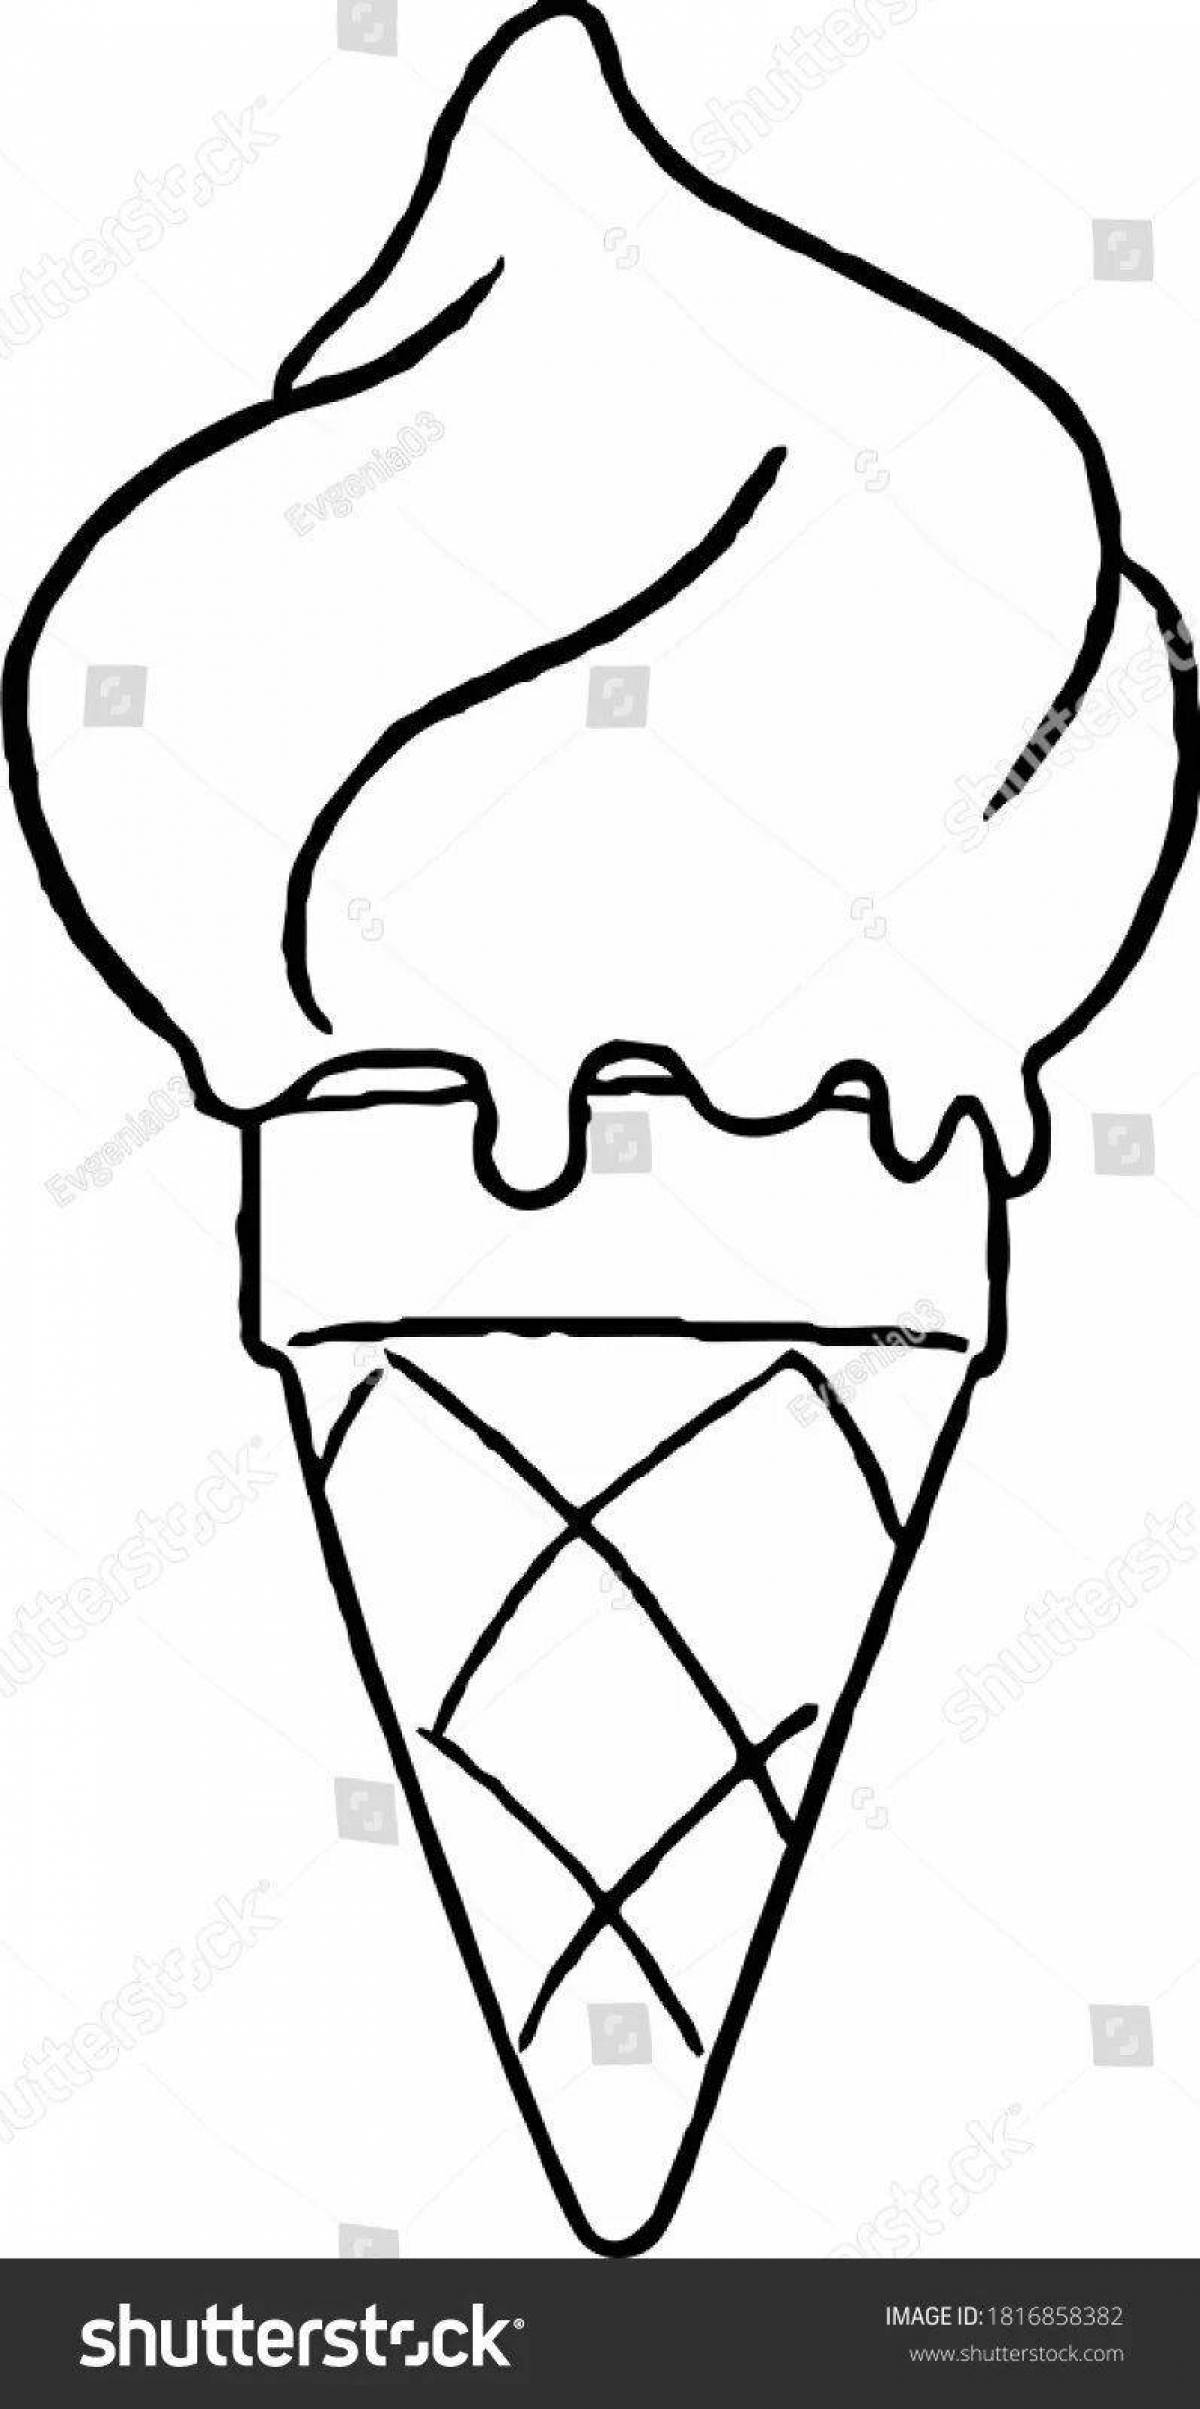 Coloring book shining ice cream for kids